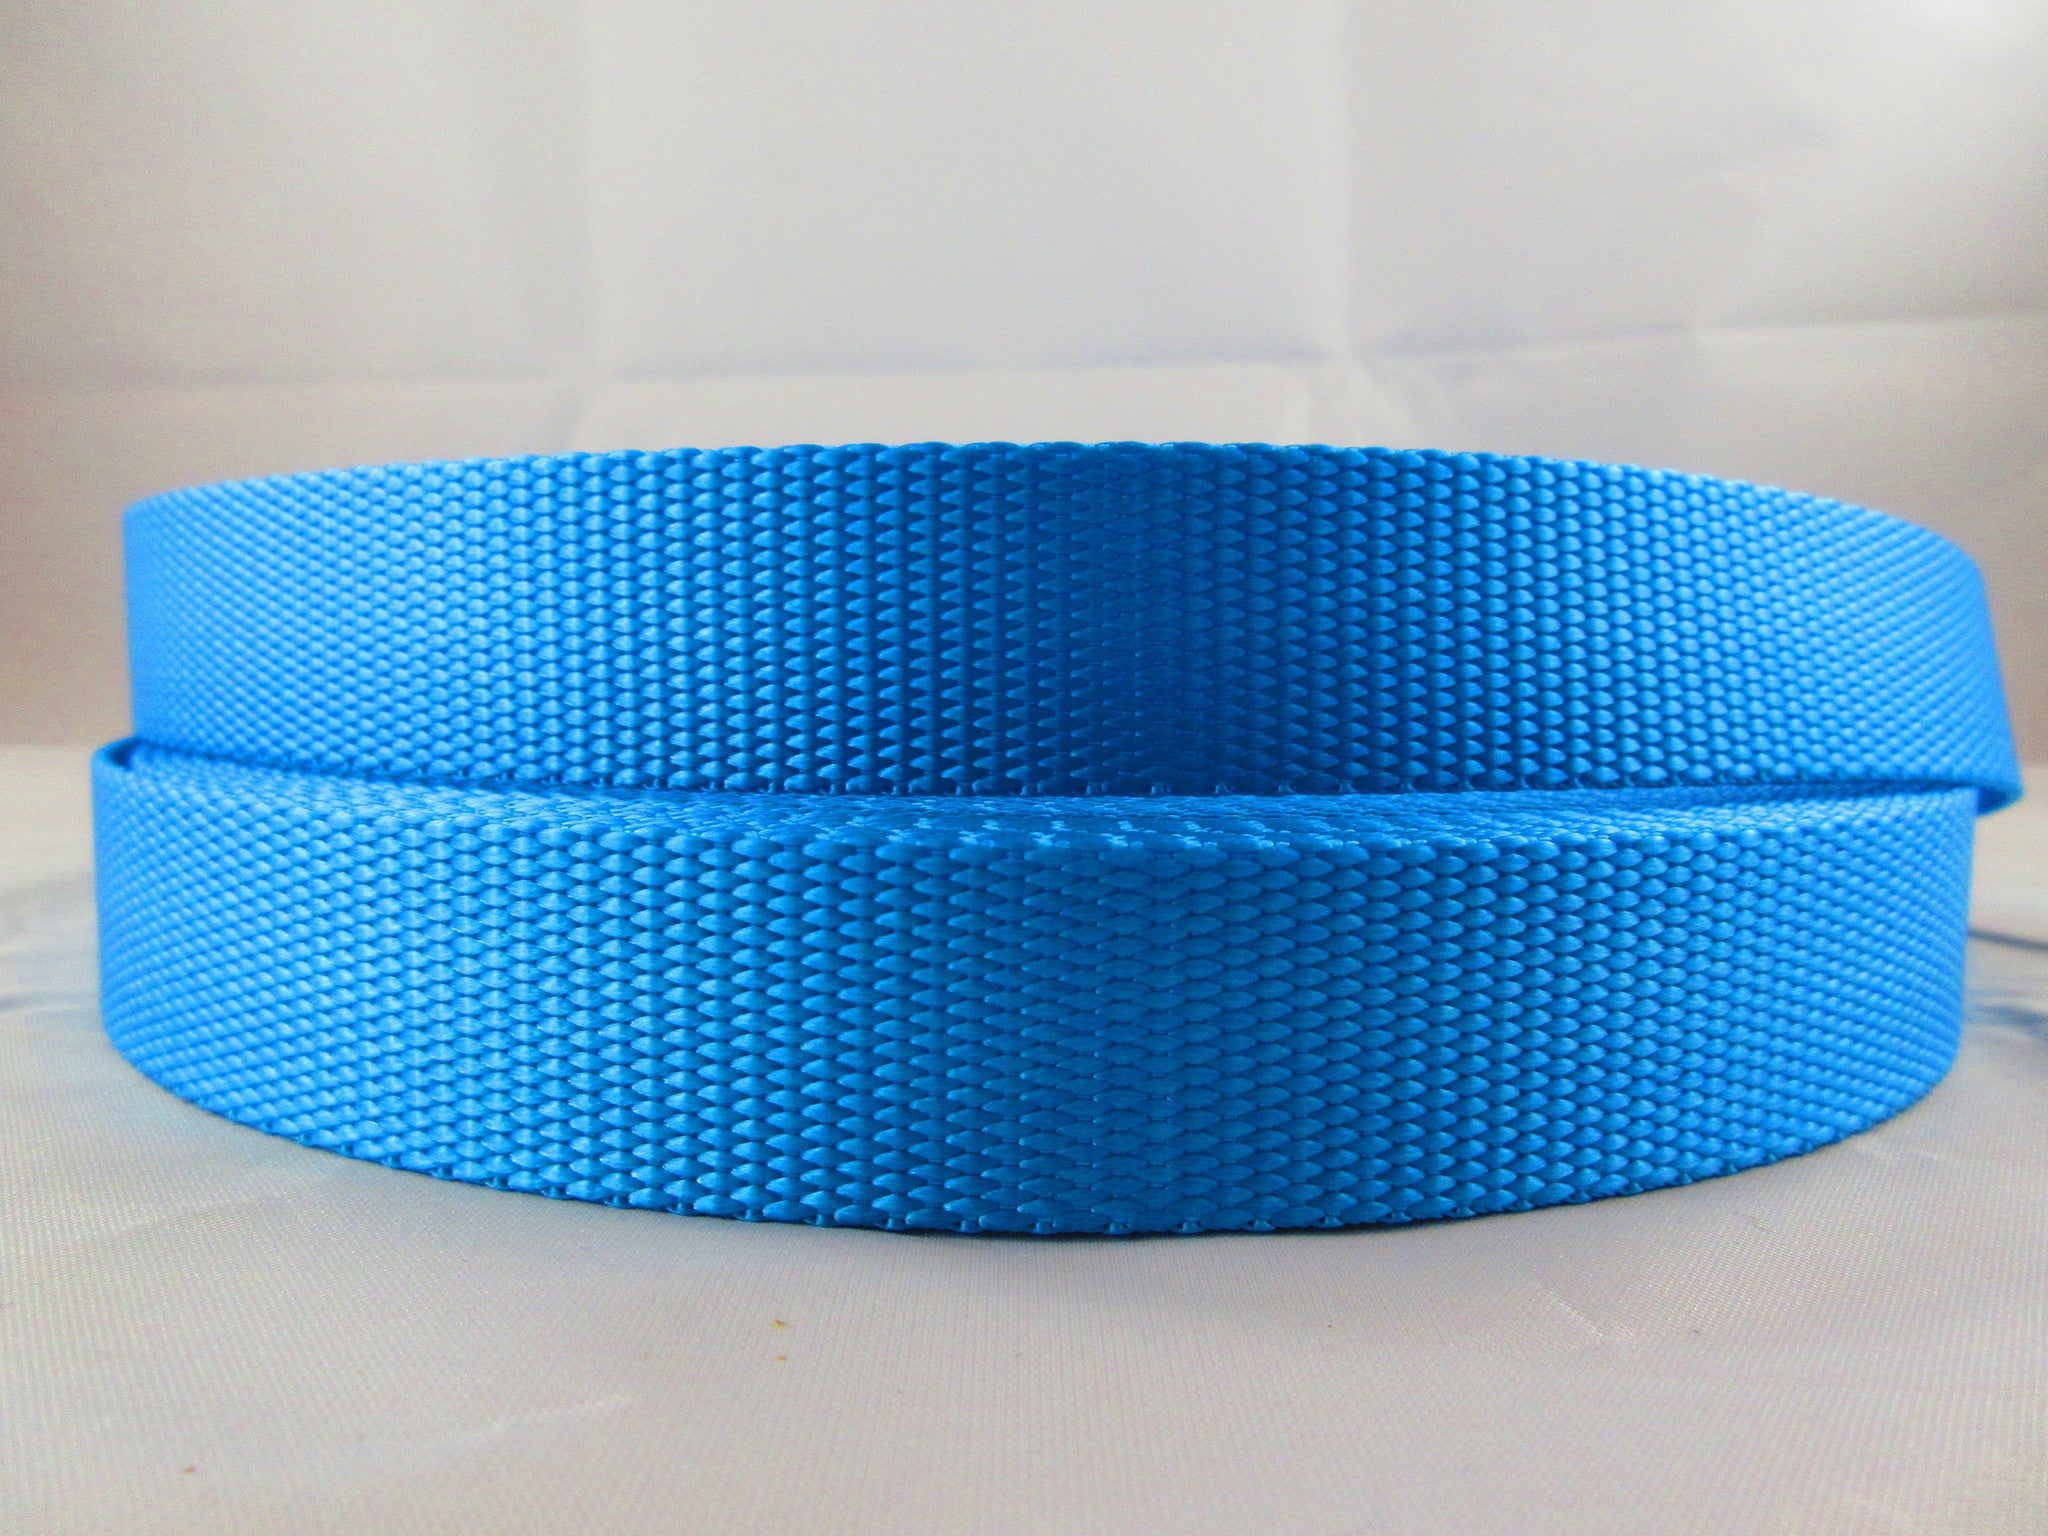 3/4" Ice Blue Nylon Pig Harness - Penny and Hoover's Pig Pen